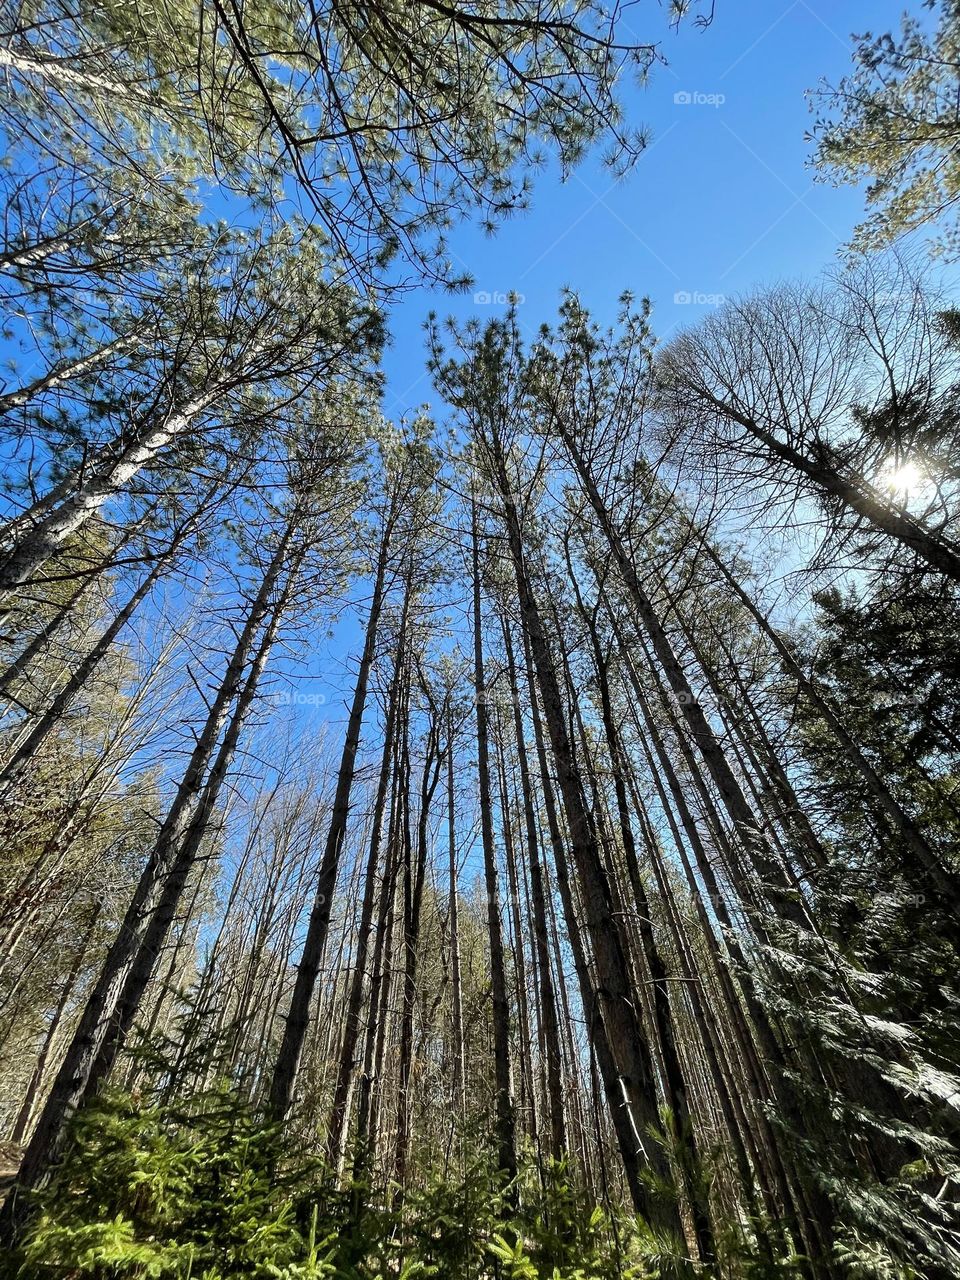 Look up into the trees